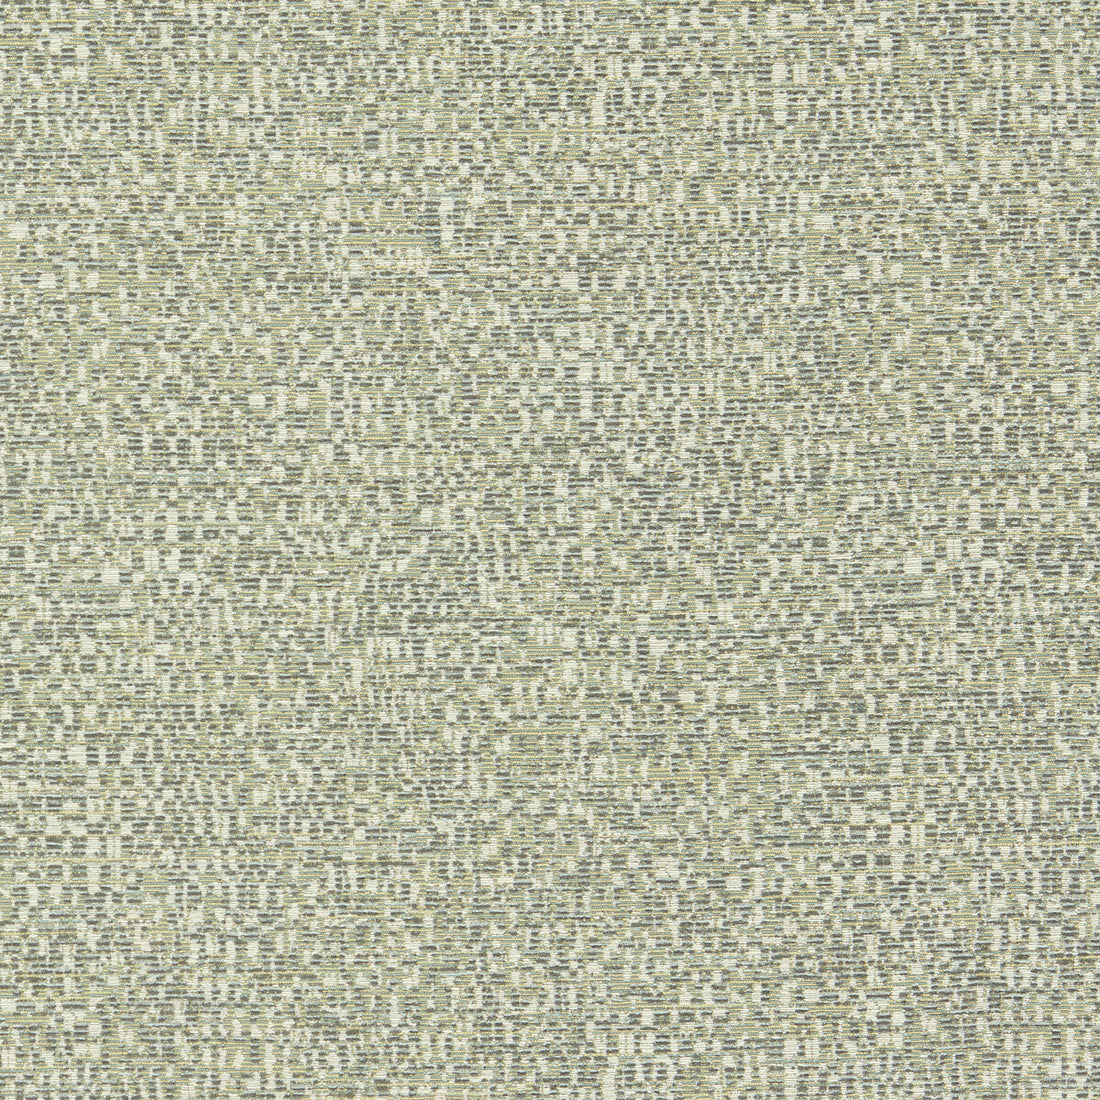 Orion fabric in mineral color - pattern F1619/02.CAC.0 - by Clarke And Clarke in the Clarke And Clarke Equinox 2 collection